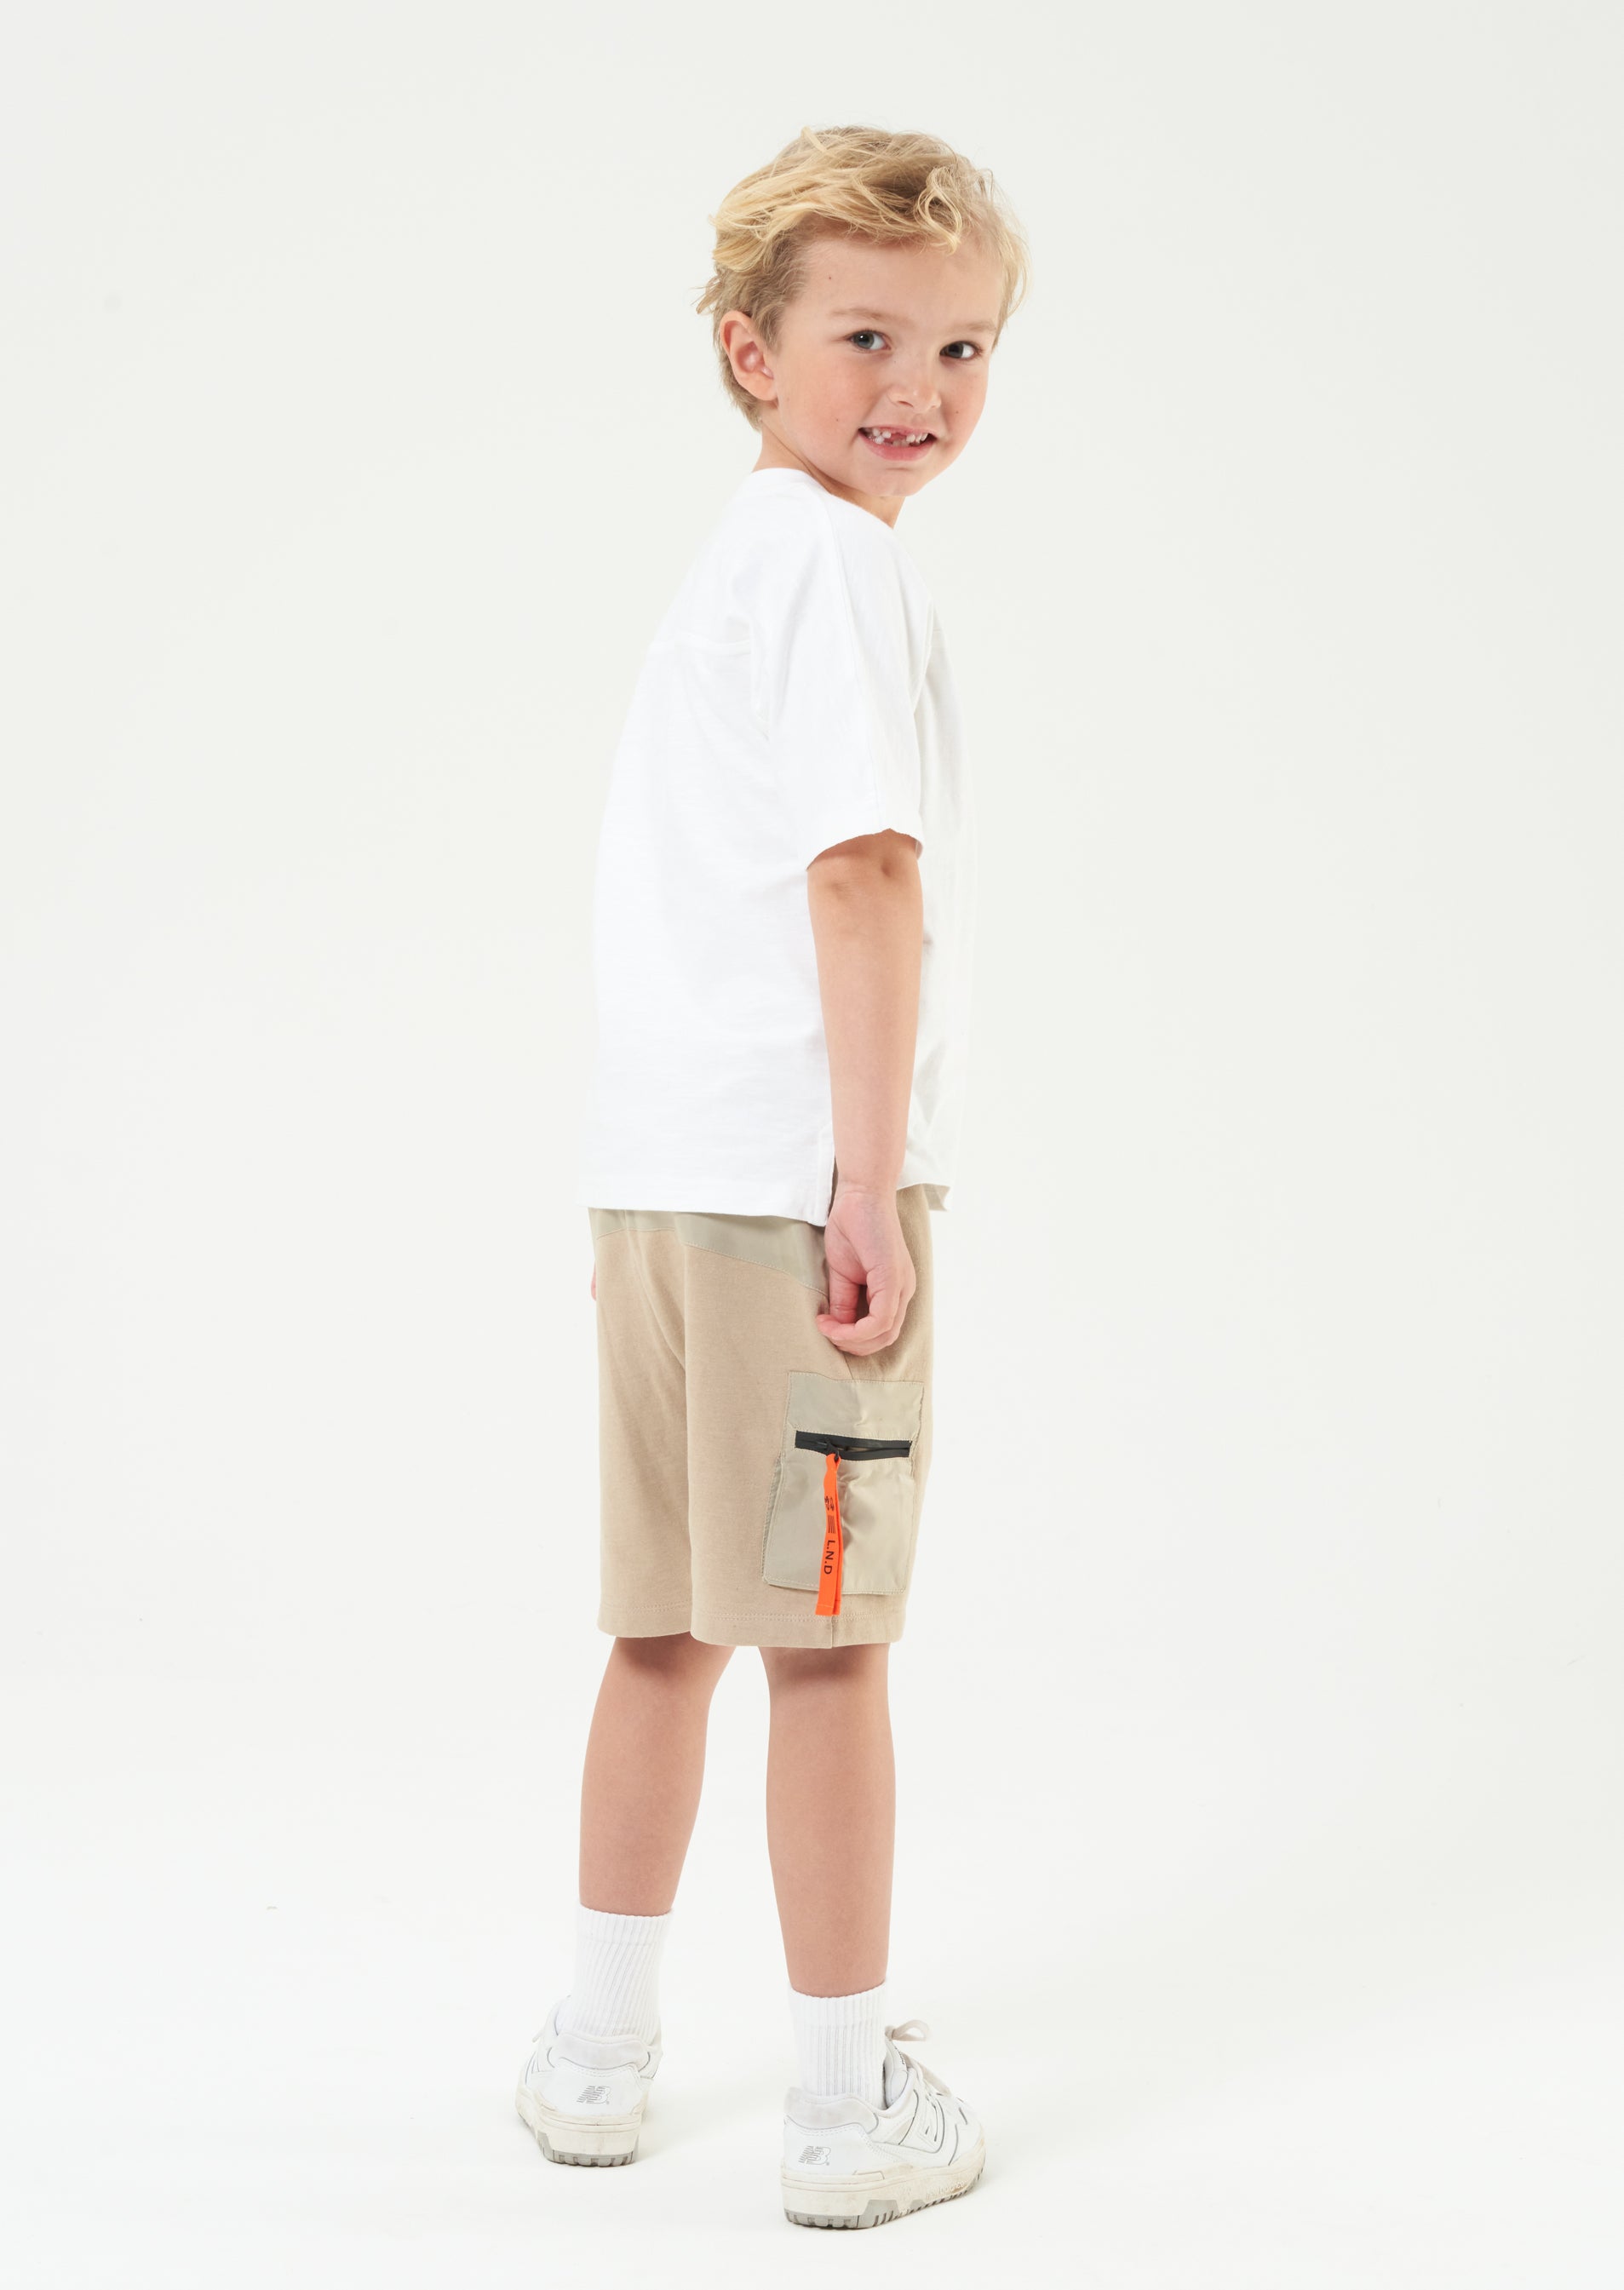 Boys Solid Brown Shorts with Pocket